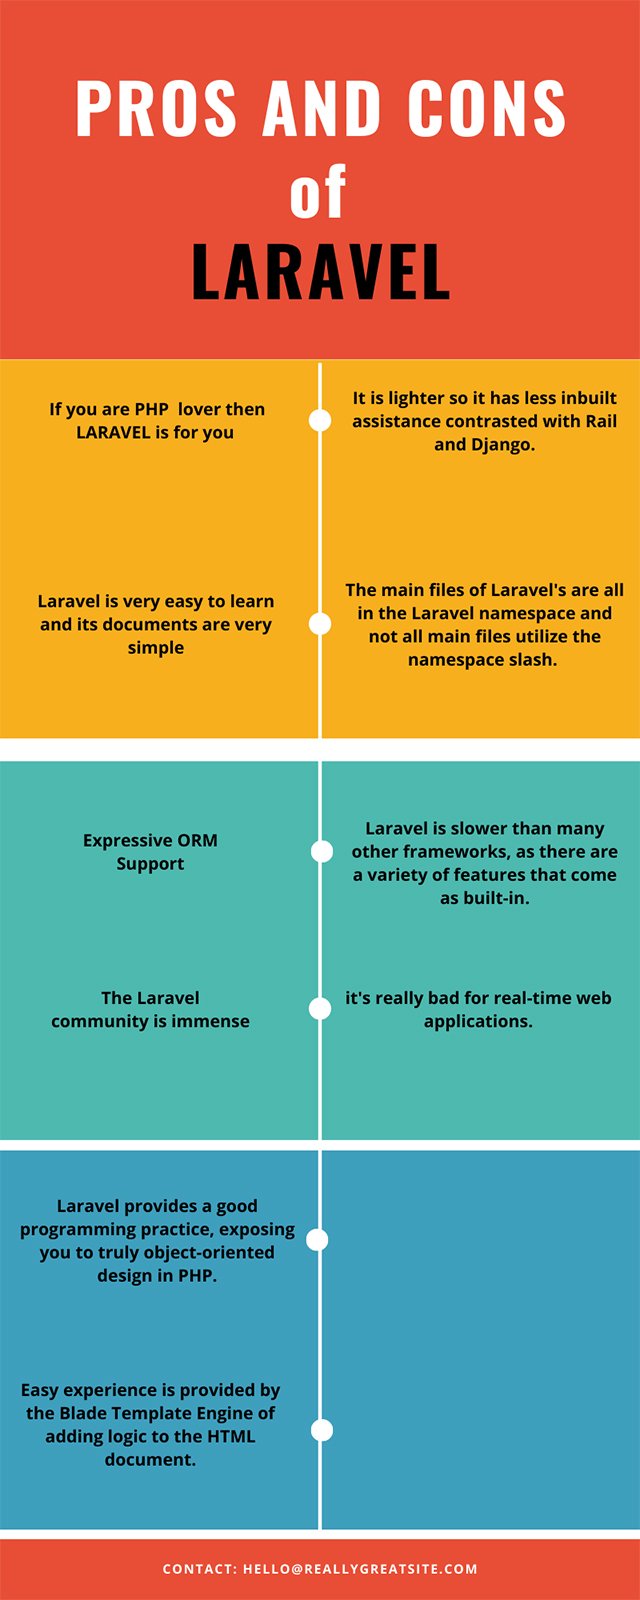 Cons and Pros of Laravel in PHP Framework